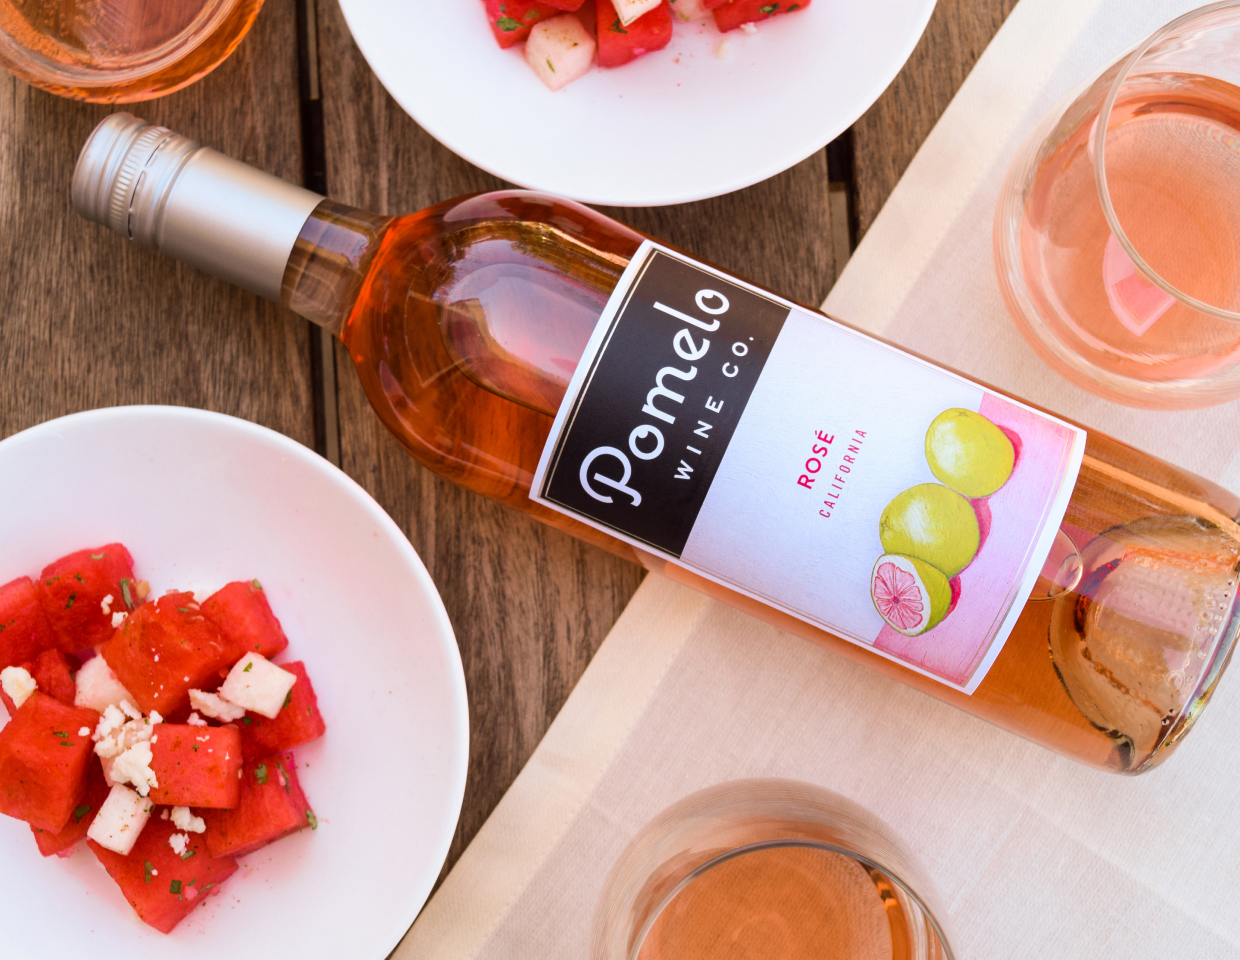 Bottle of Pomelo rose in on a table surrounded by wine glasses and bowls of watermelon and goat cheese salad